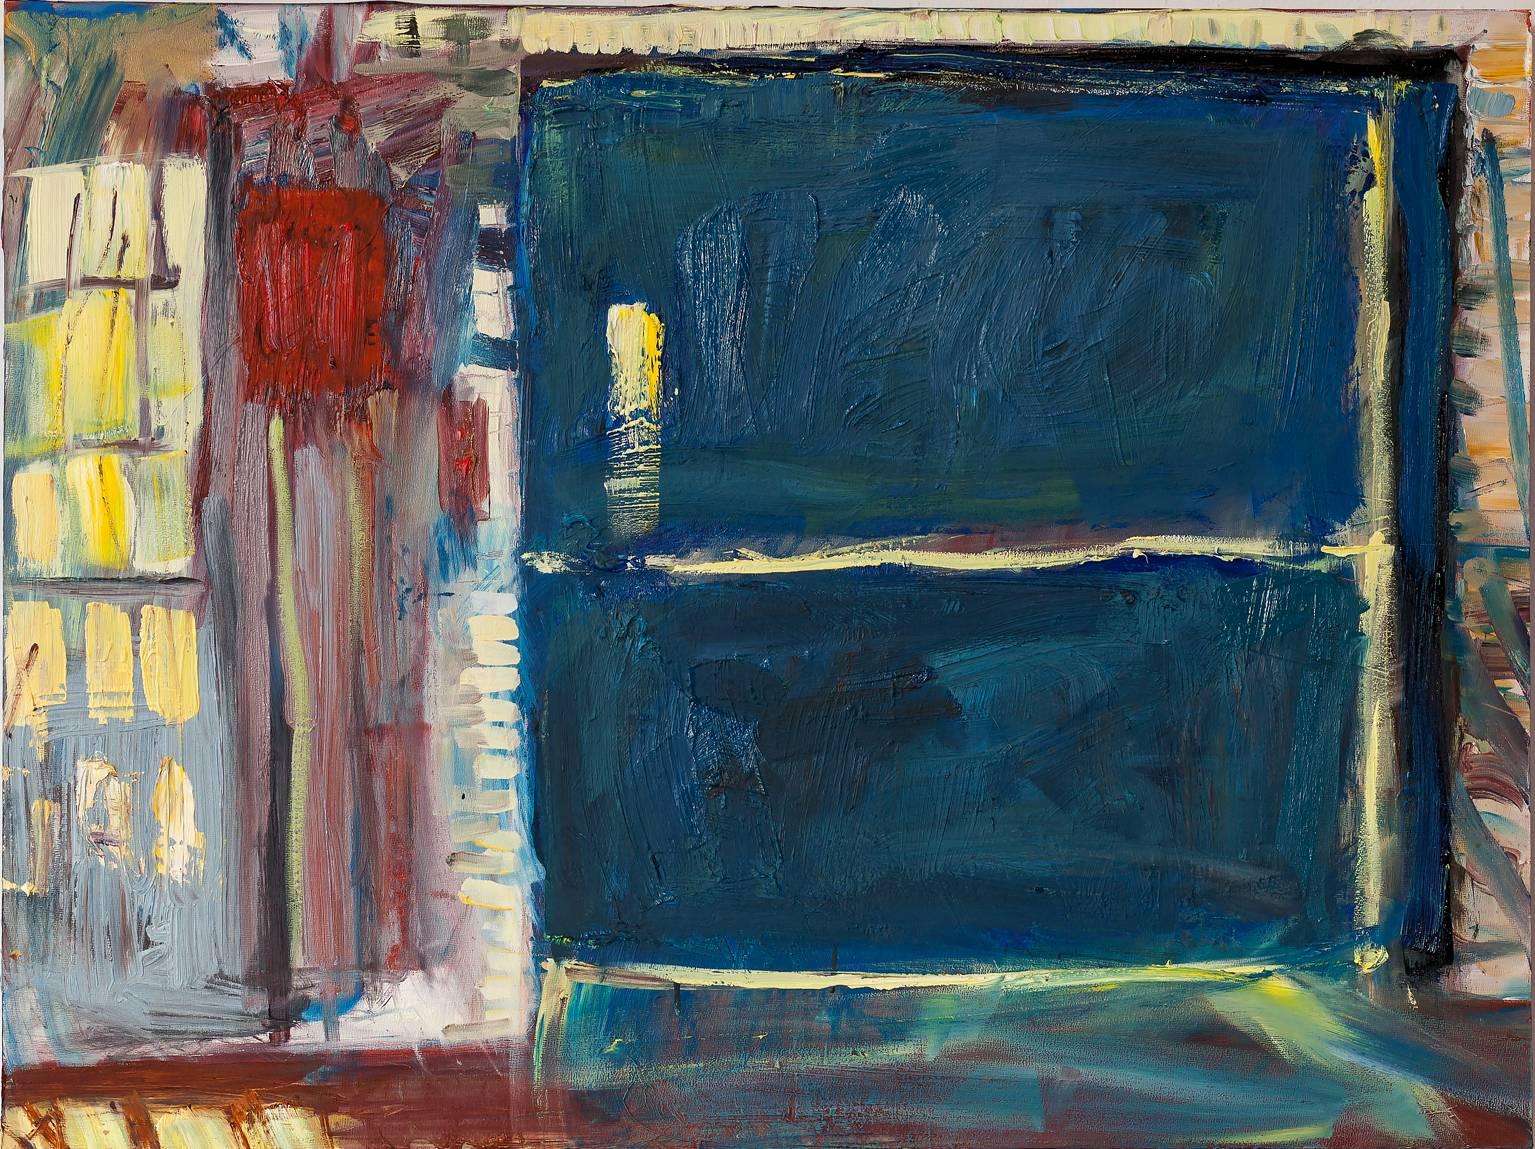 "The Freight Elevator", oil painting, textural, factory, blue, red, door - Painting by Catherine Picard-Gibbs